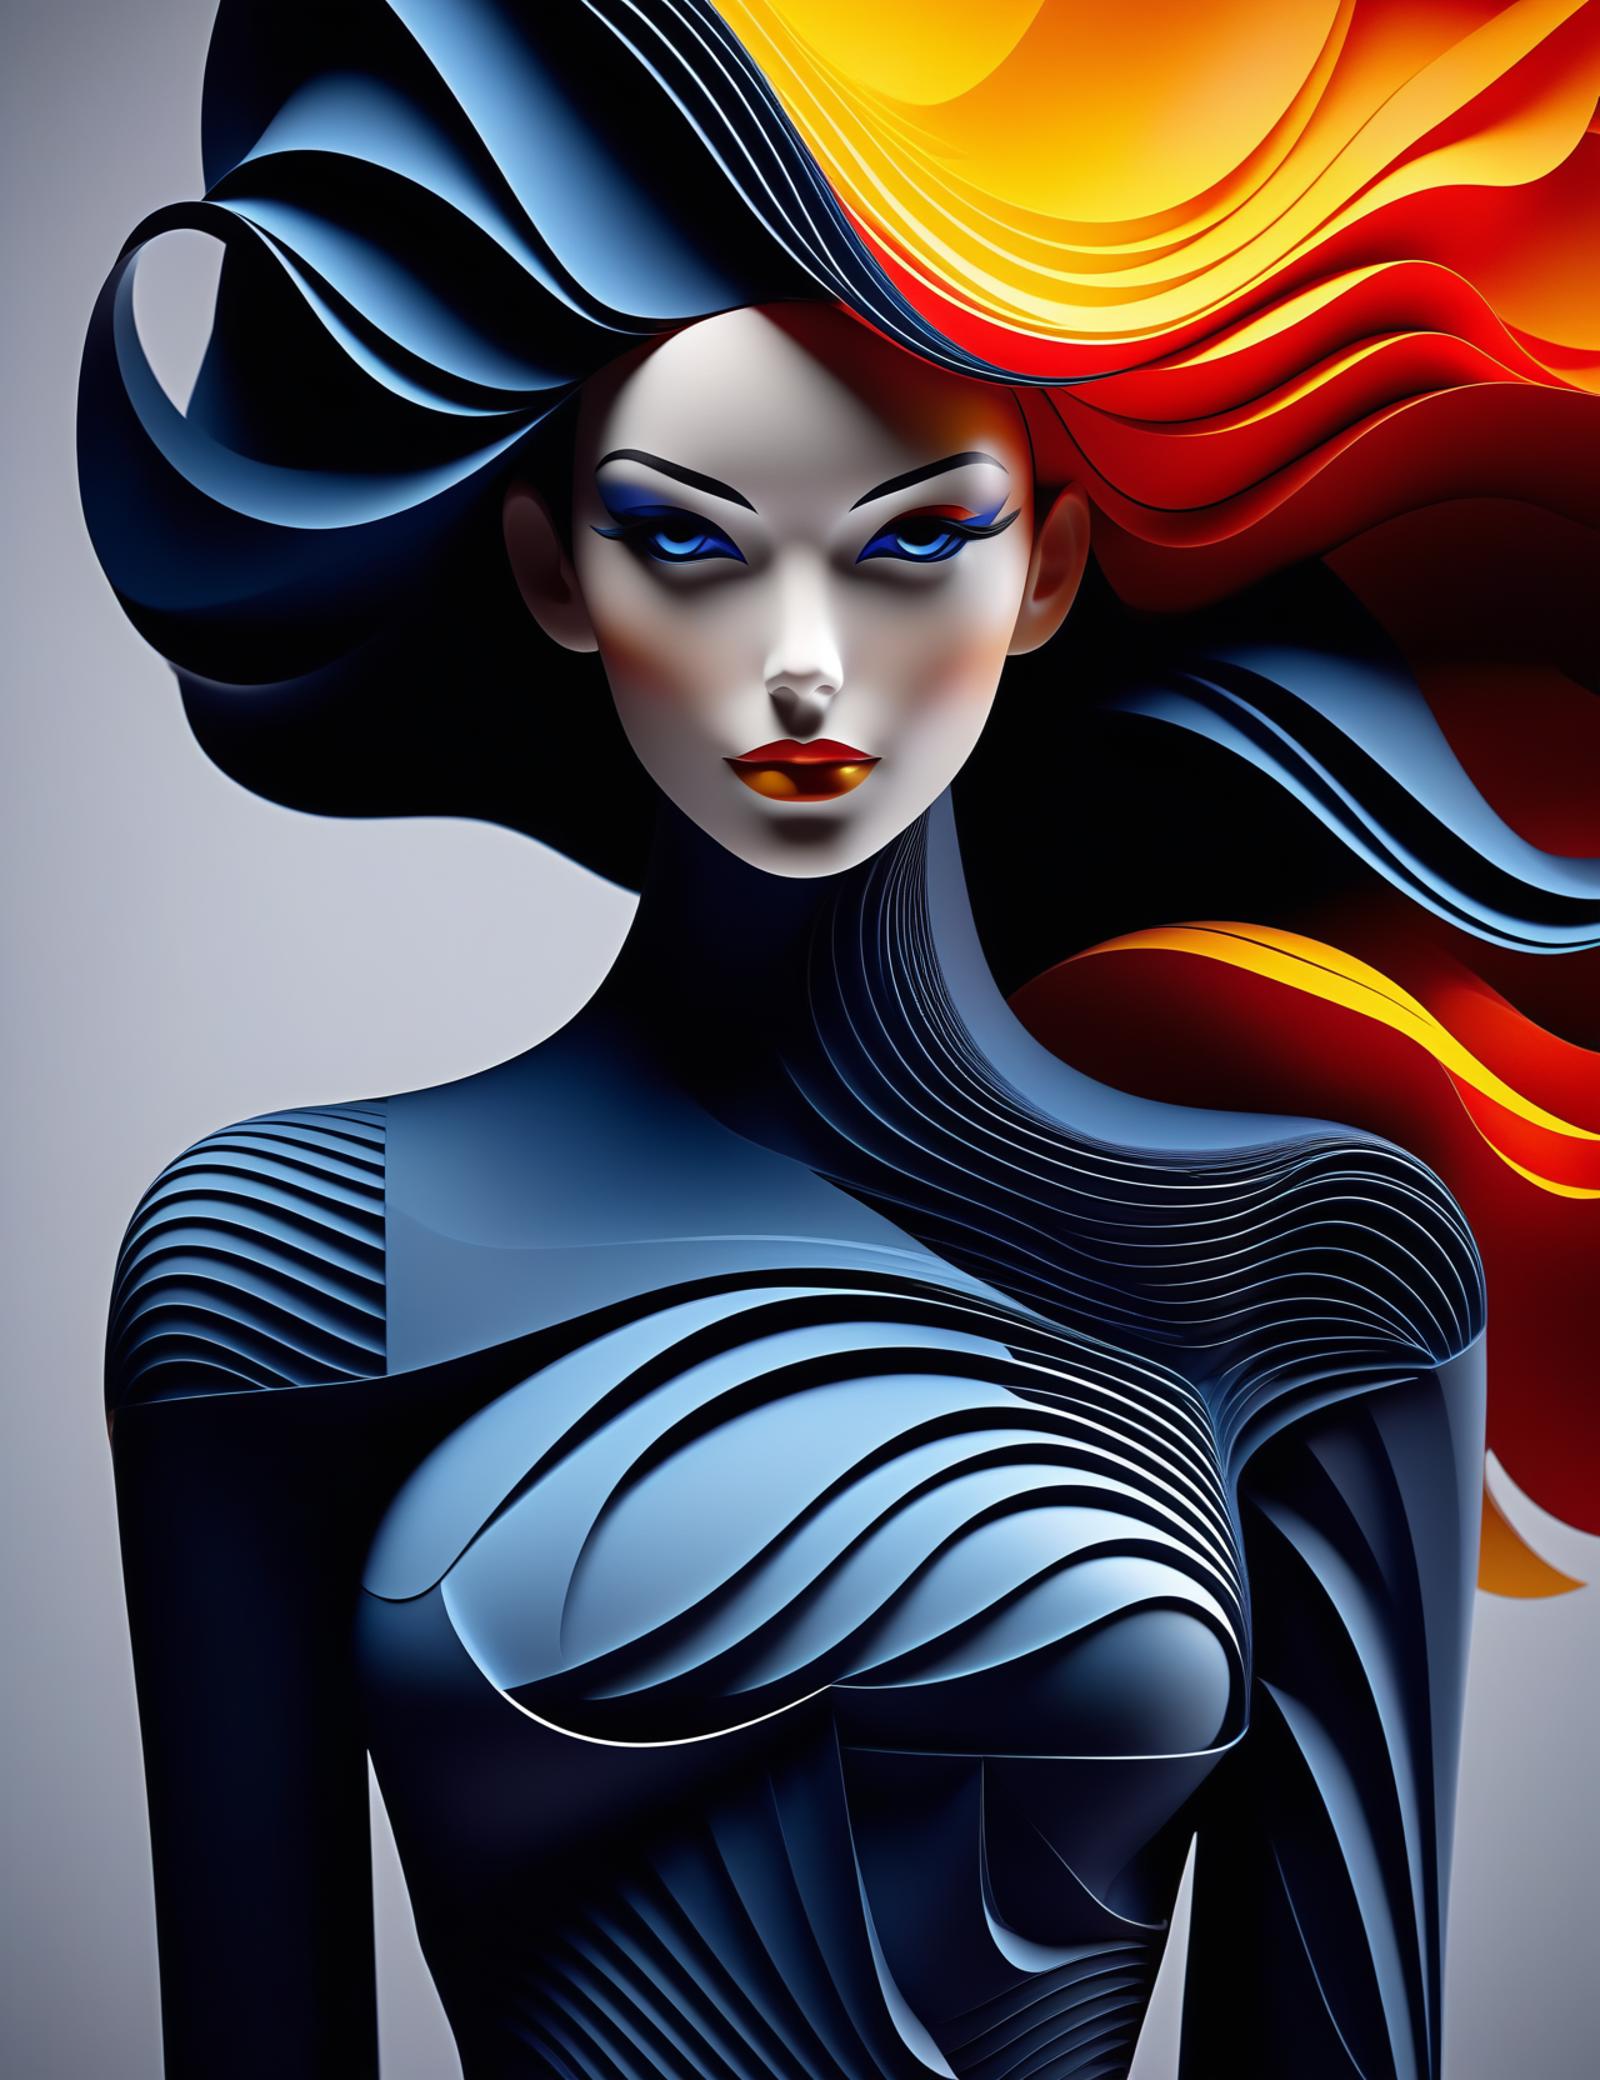 Artistic 3D Model of a Woman with Brightly Colored Hair and Blue Eyes